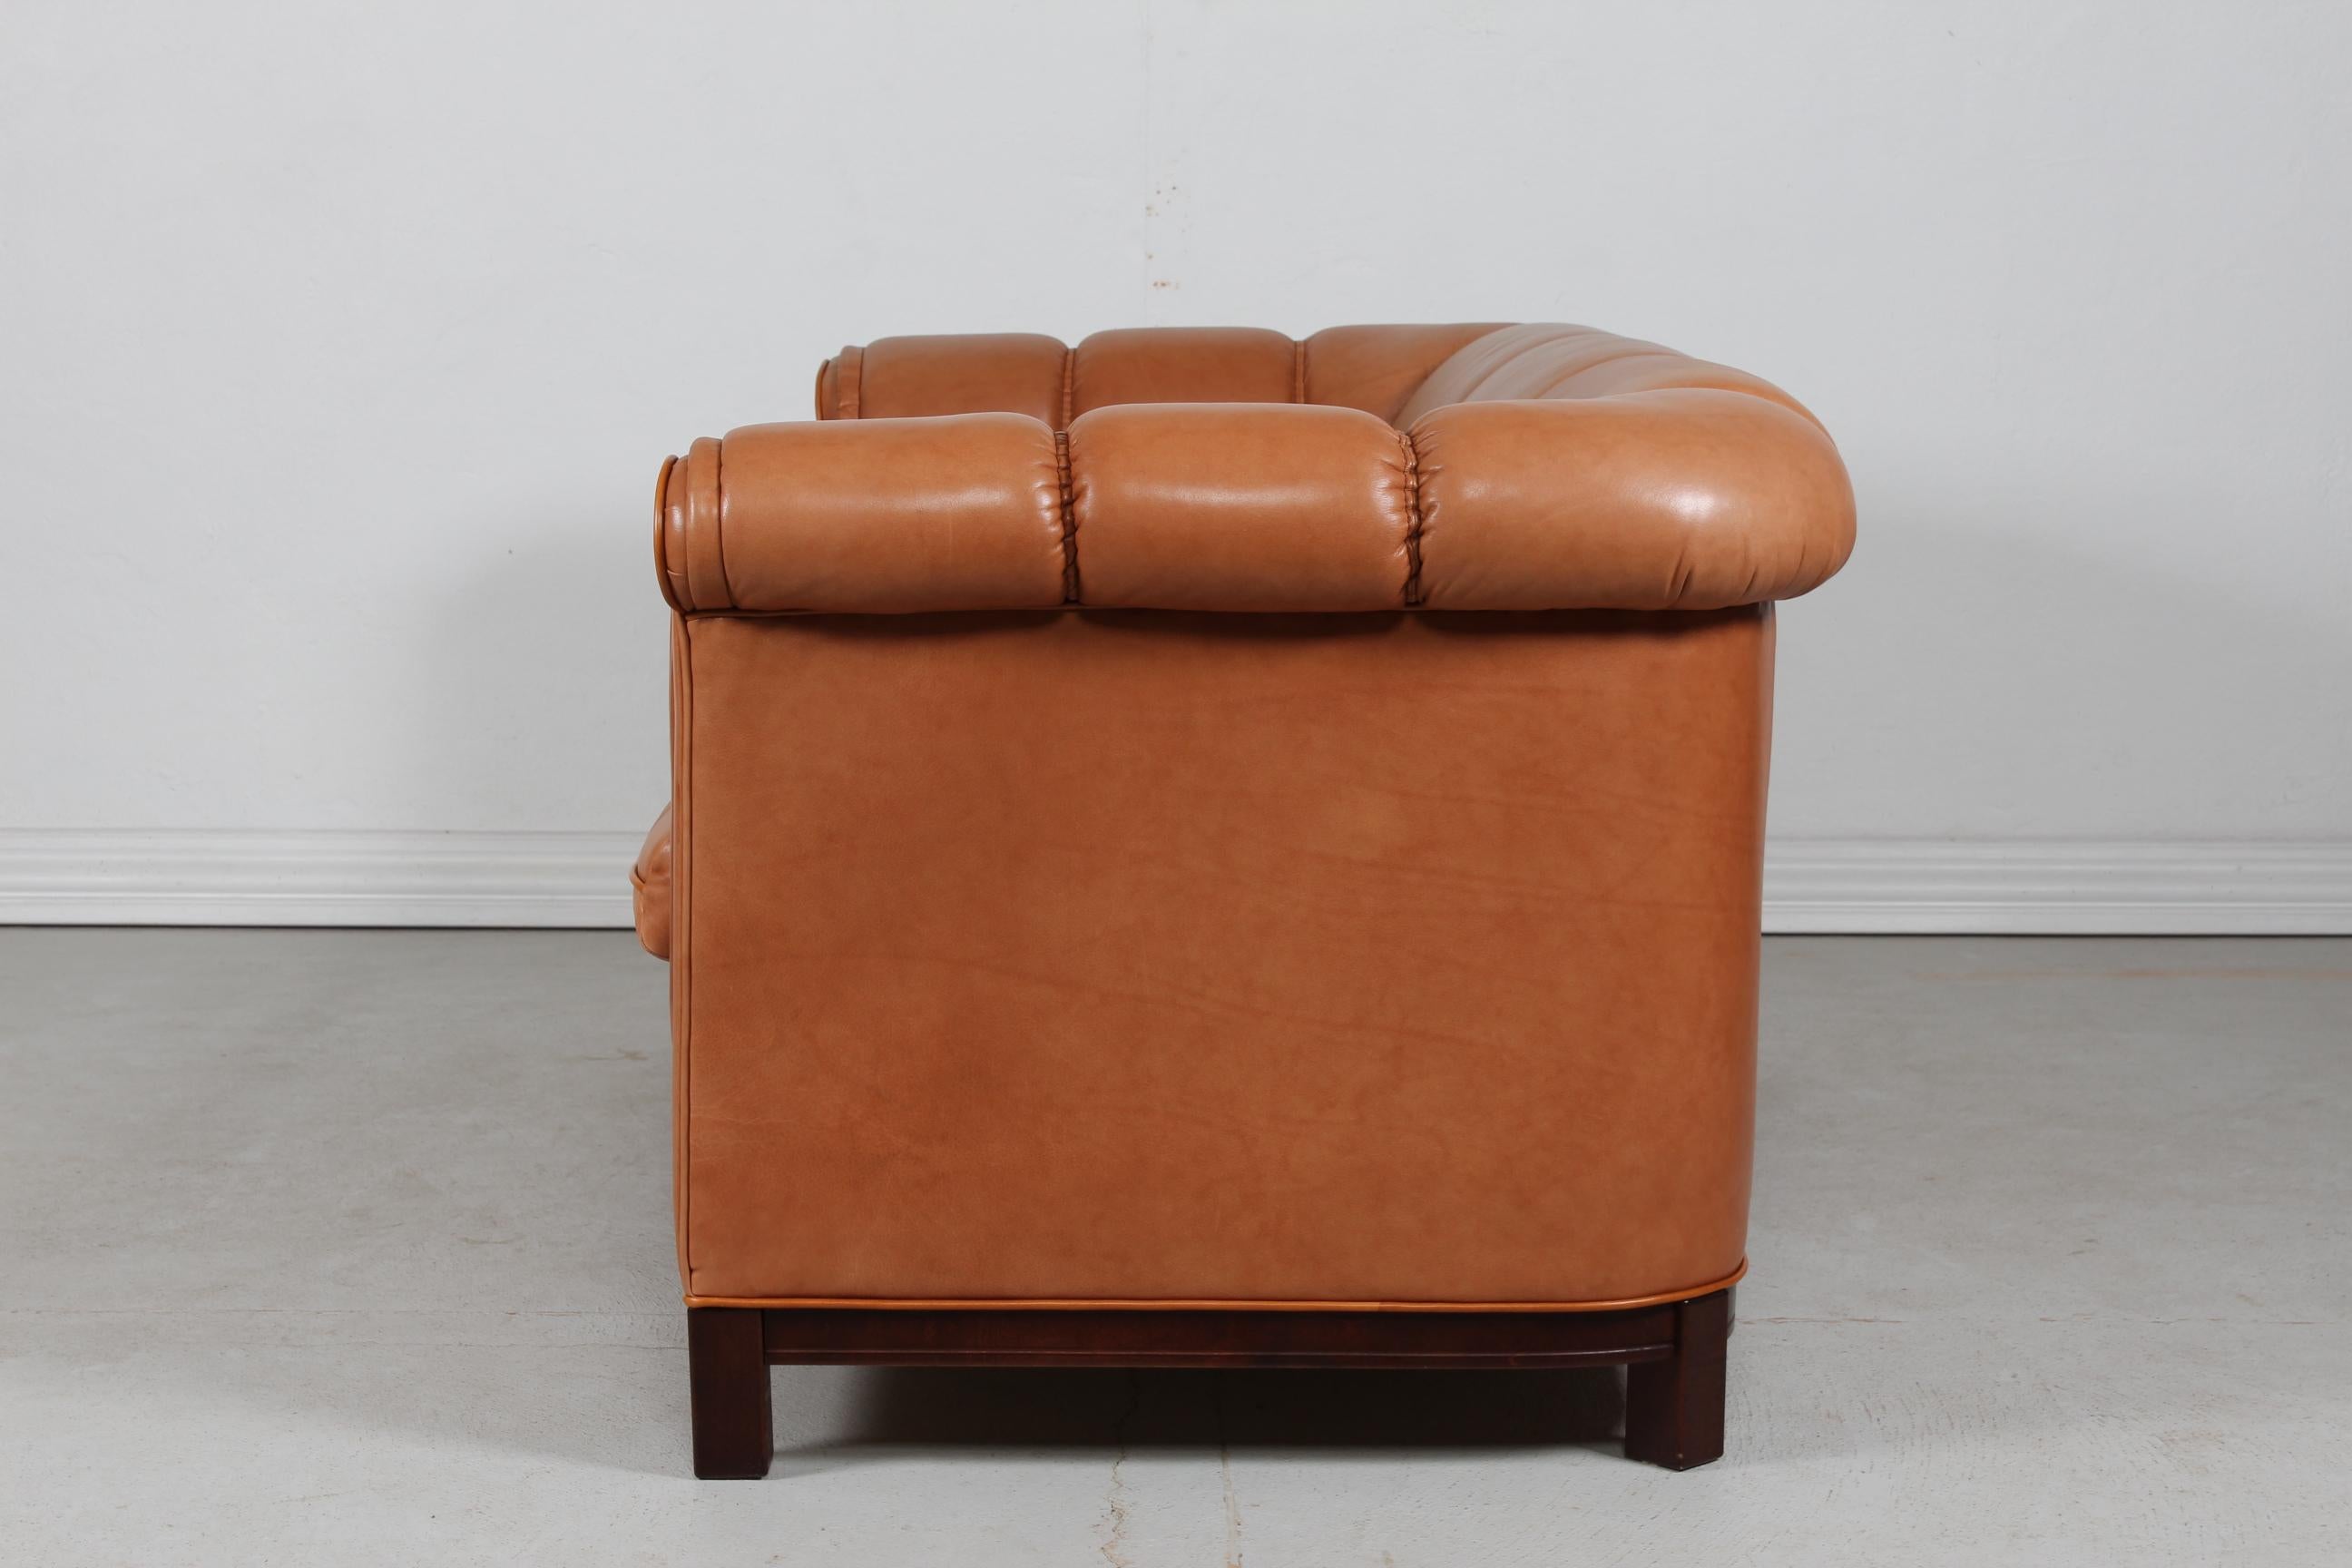 Vintage Chesterfield Sofa and Couch Cognac Leather and Mahogany Frame, 1970s For Sale 4